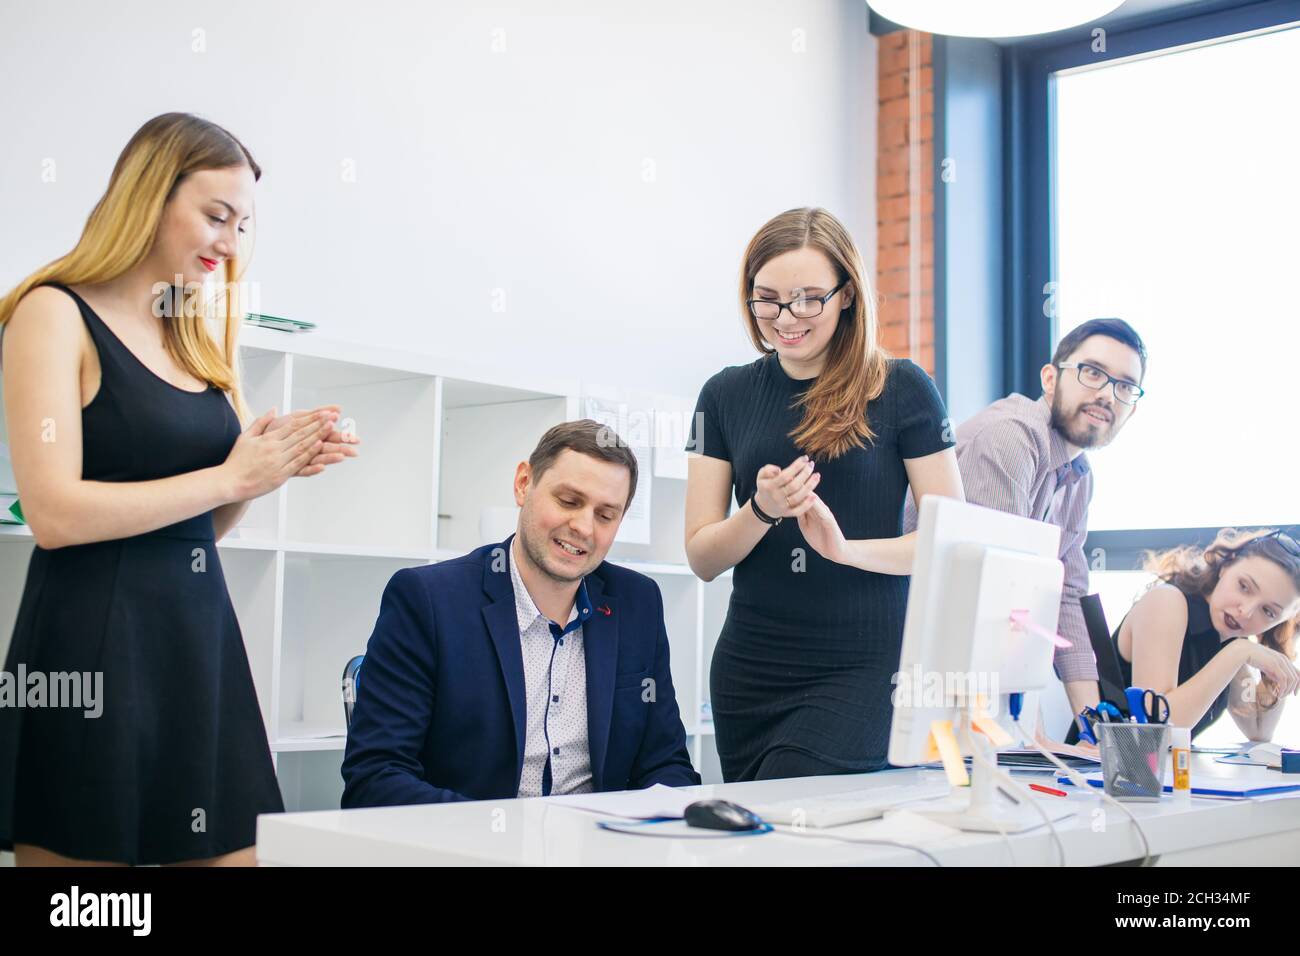 Businesswomen applauding to their modest sitting colleague. man feels confounded by colleagues' compliment Stock Photo